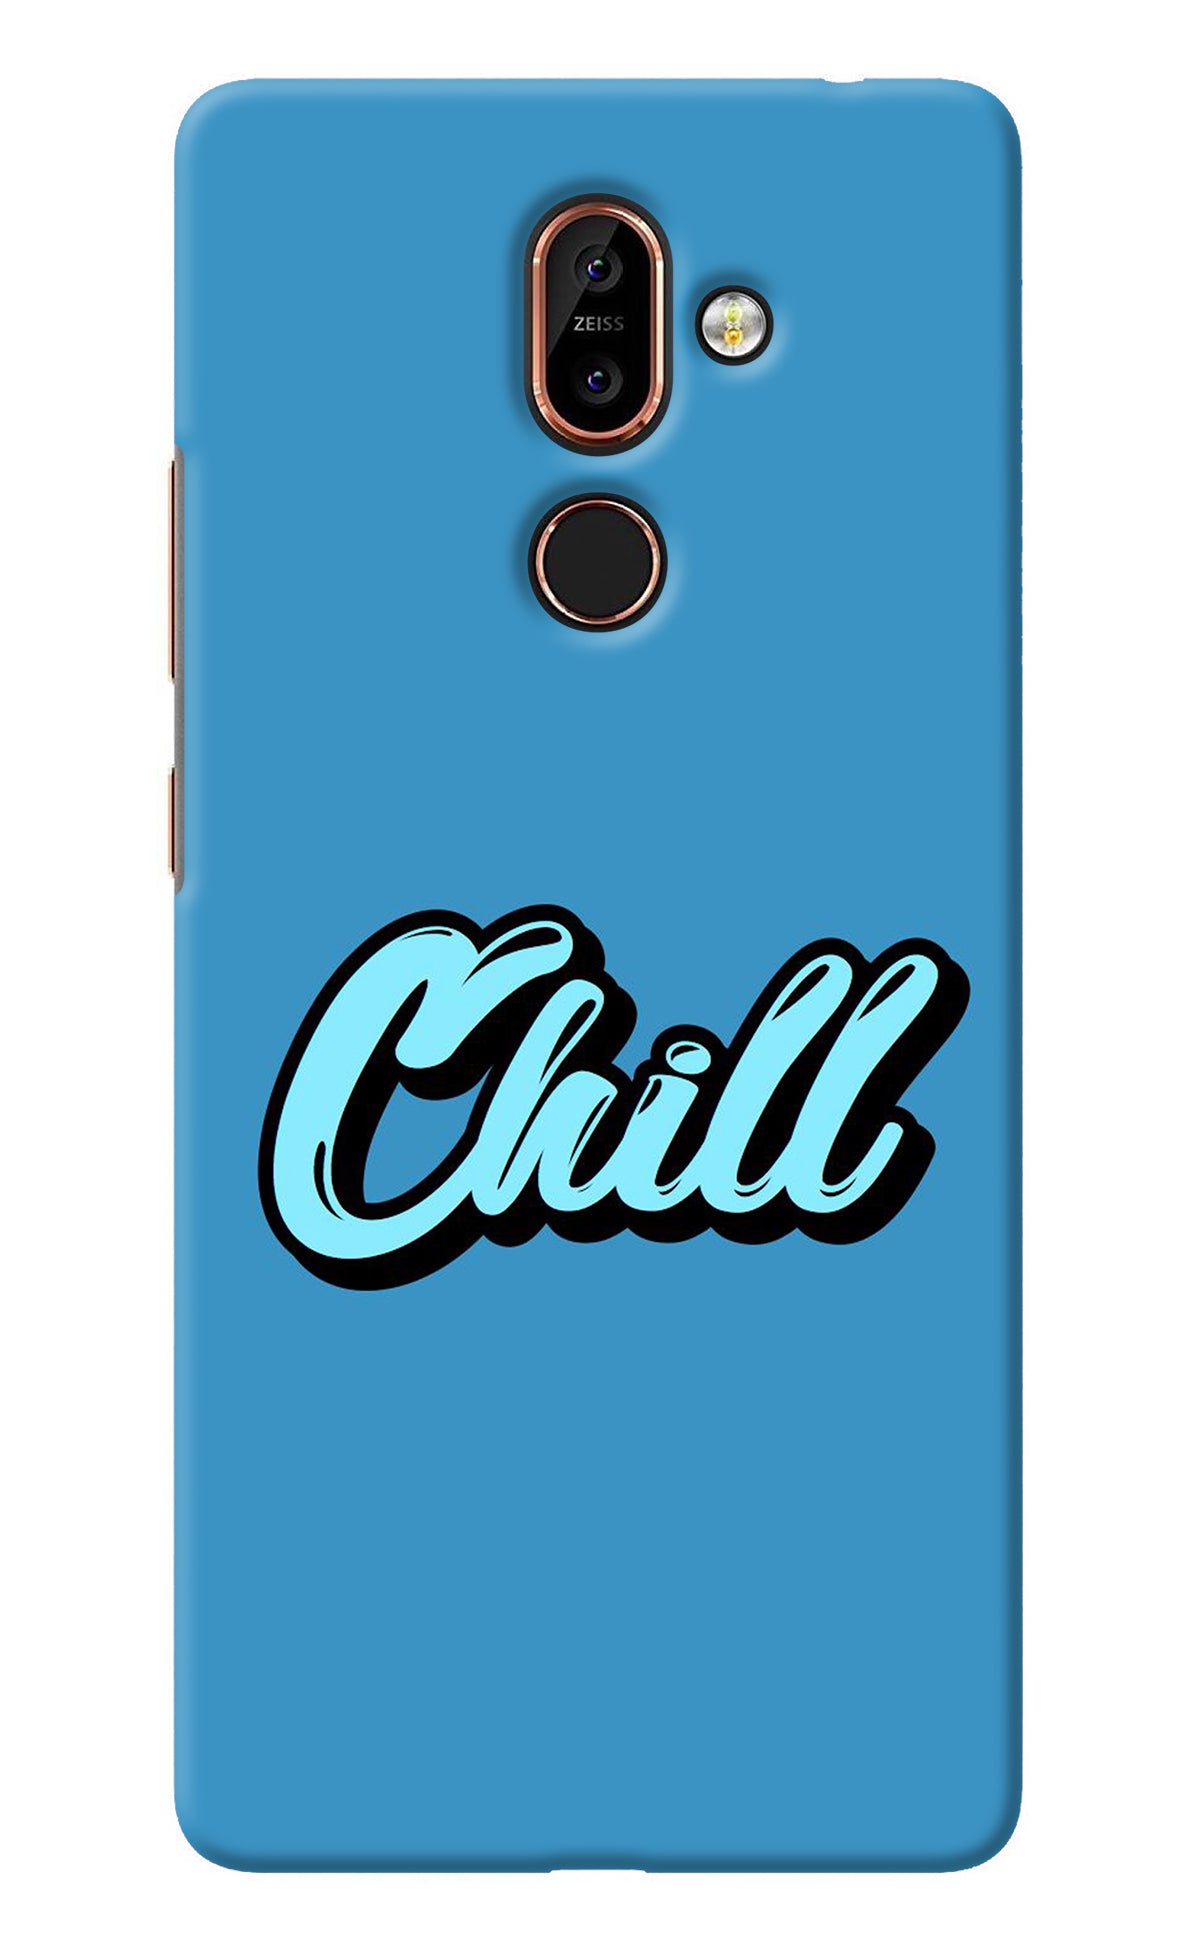 Chill Nokia 7 Plus Back Cover